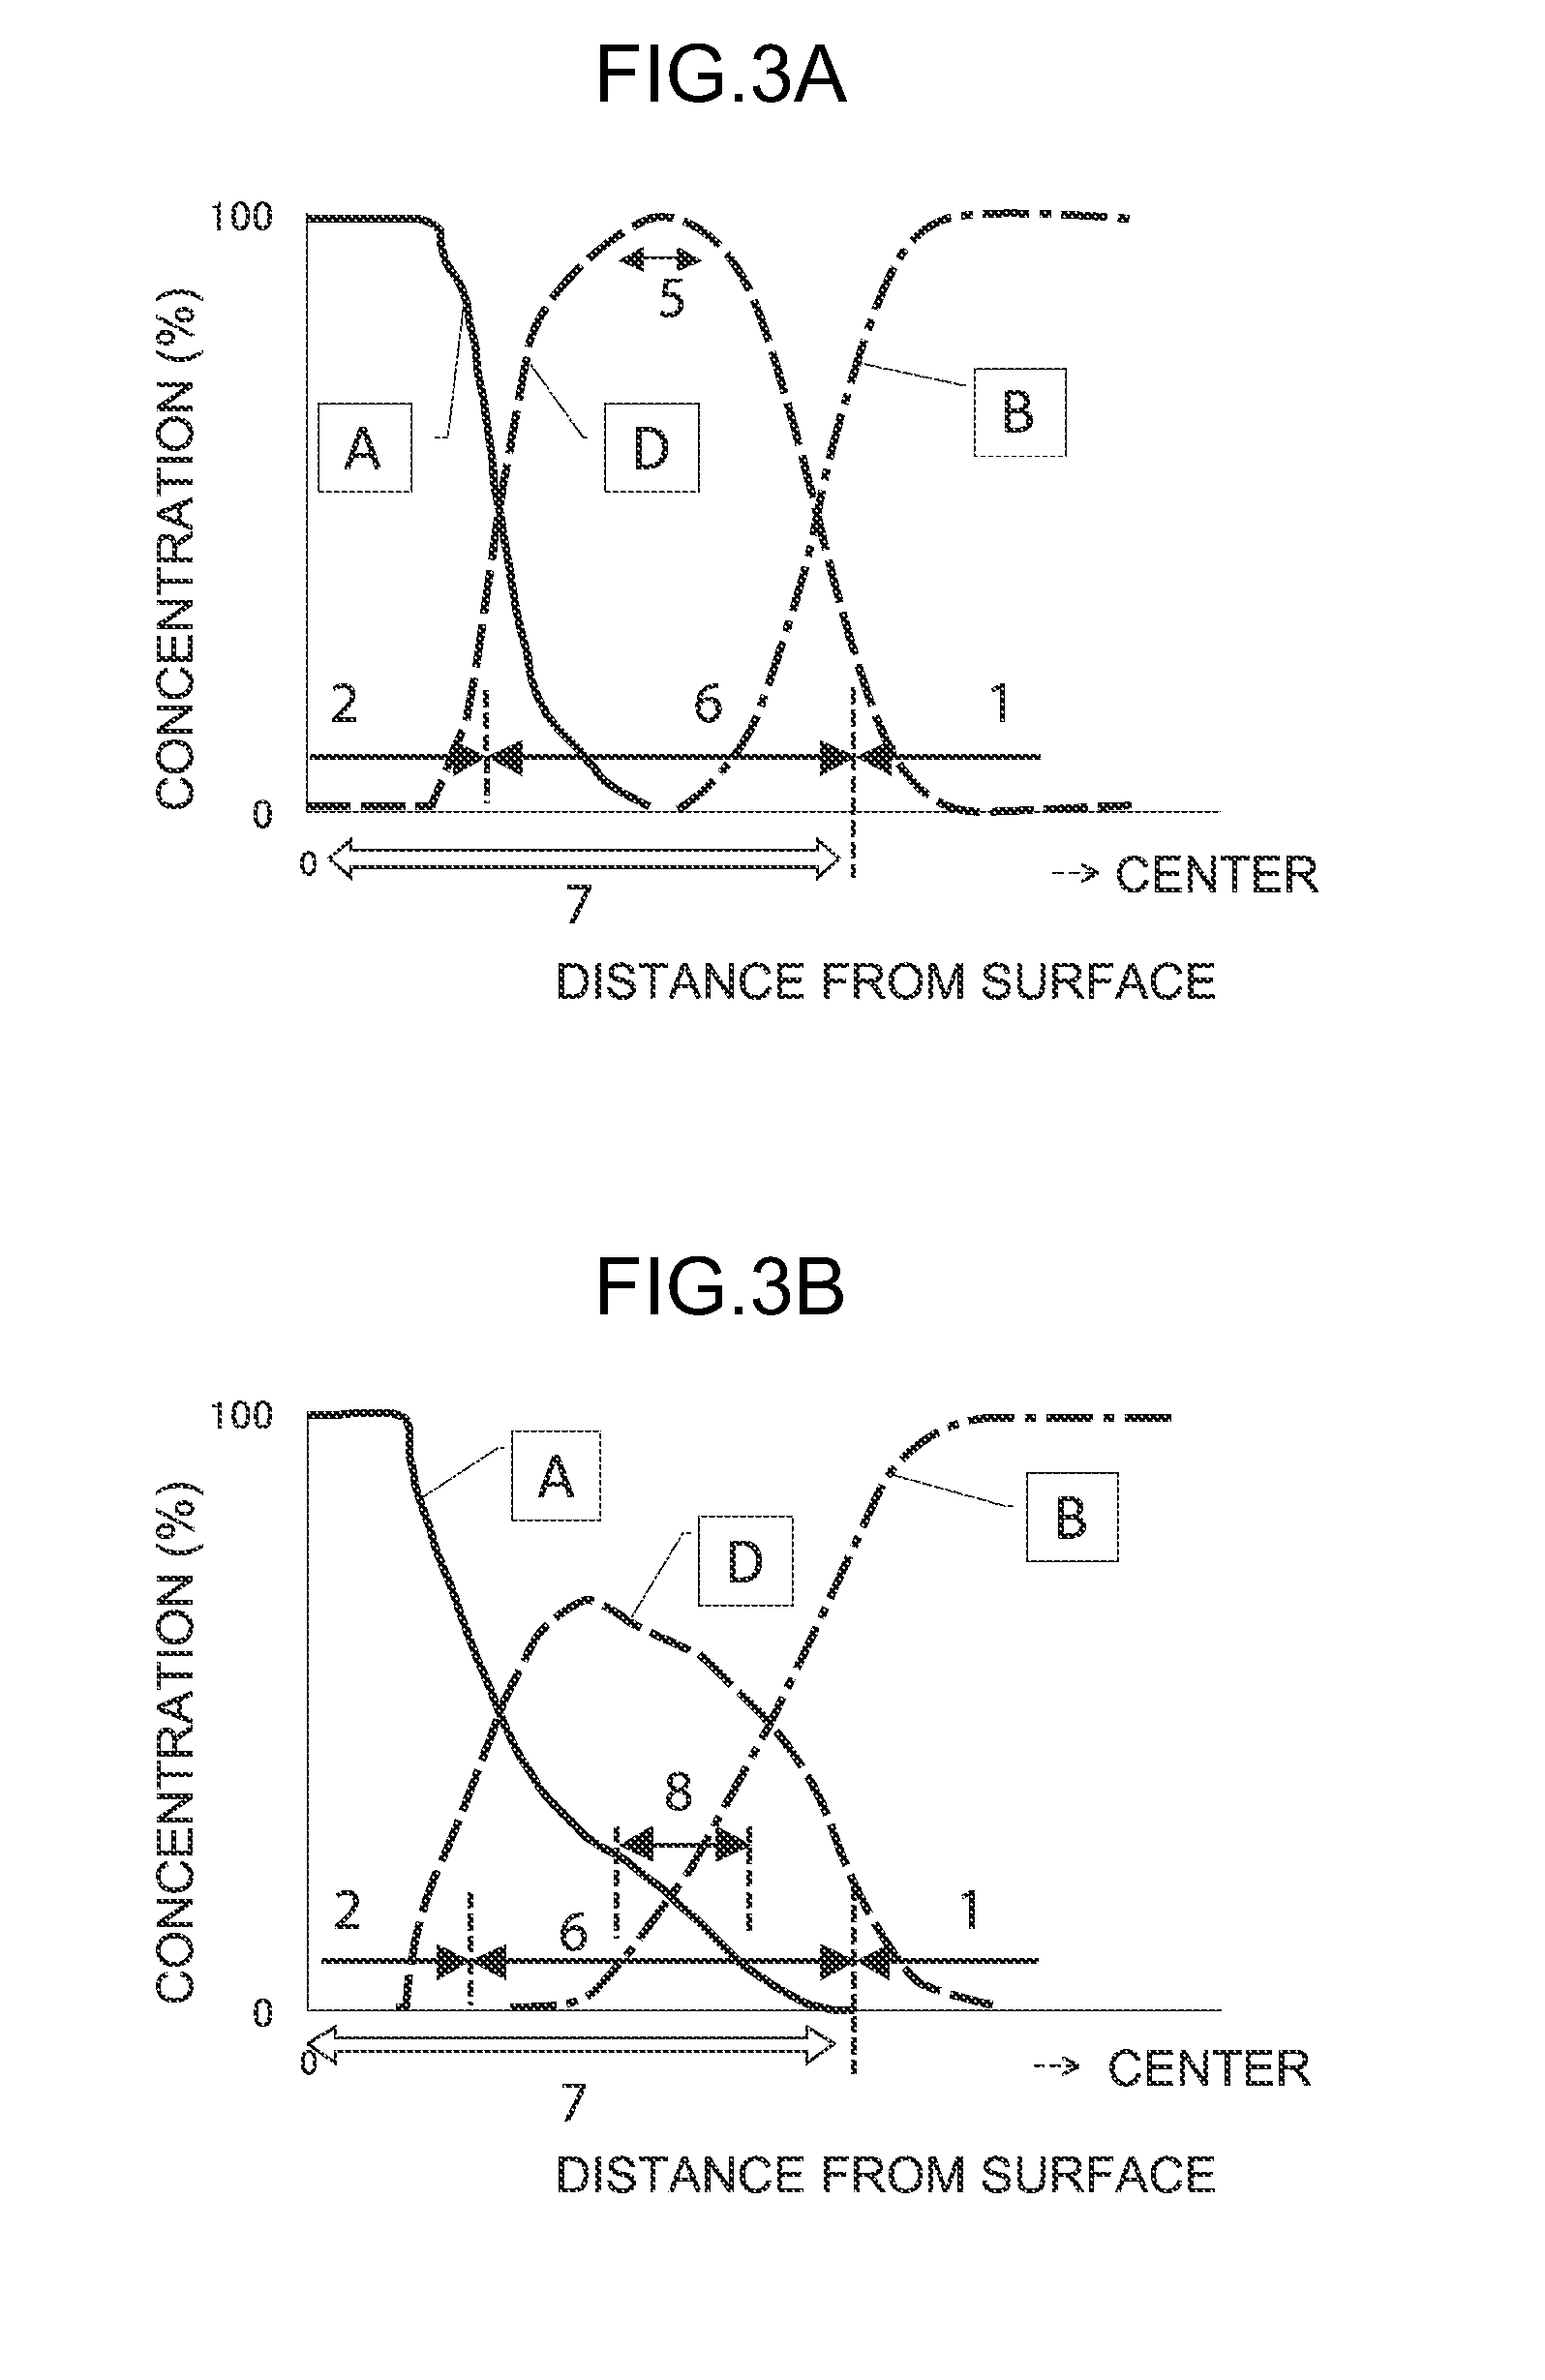 Bonding wire for semiconductor